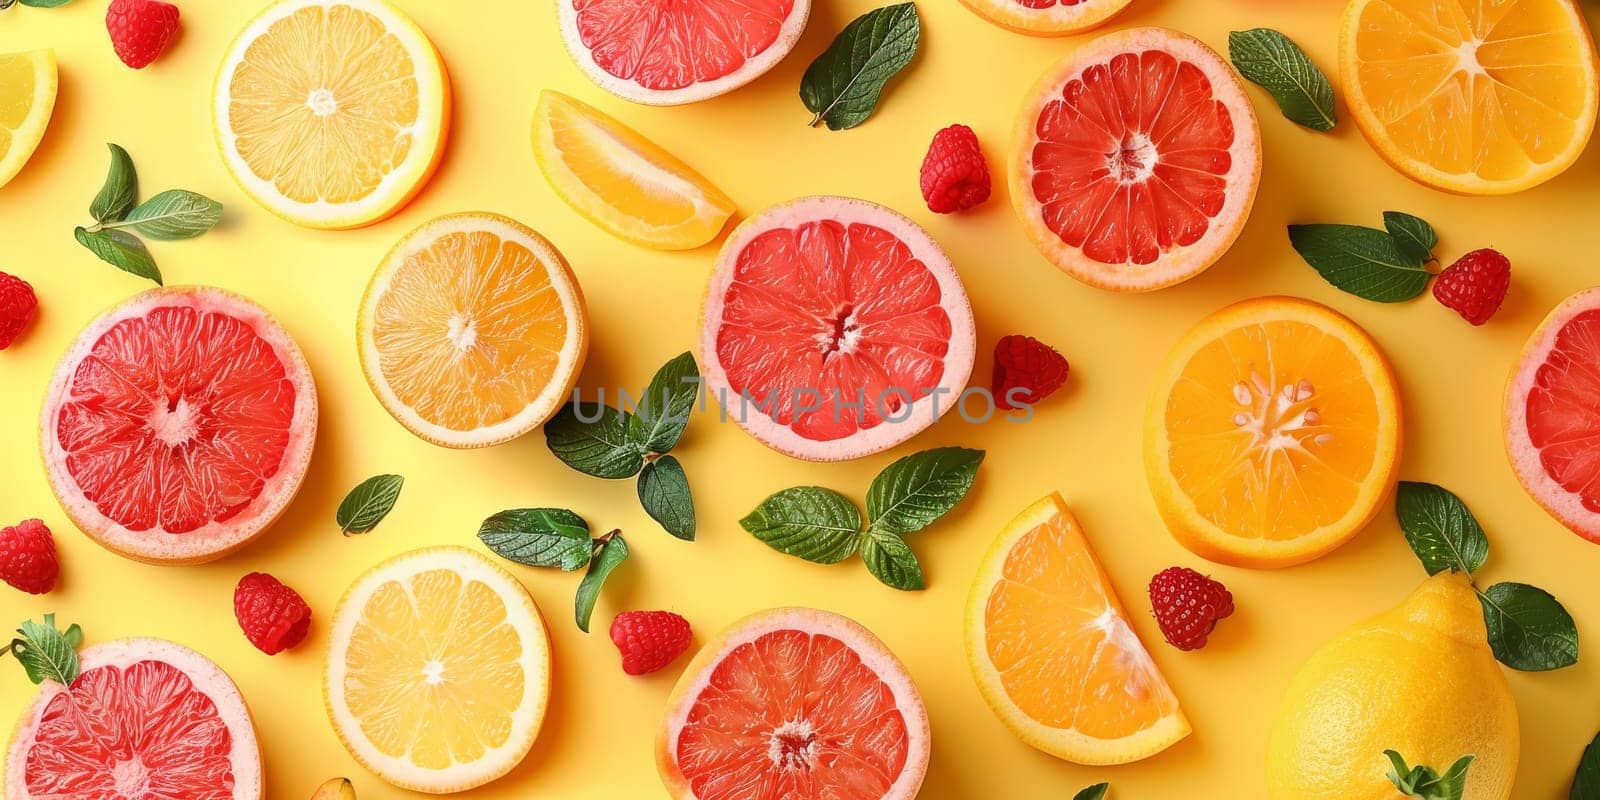 A yellow background with a variety of fruits including oranges, kiwis, strawberries, and grapes